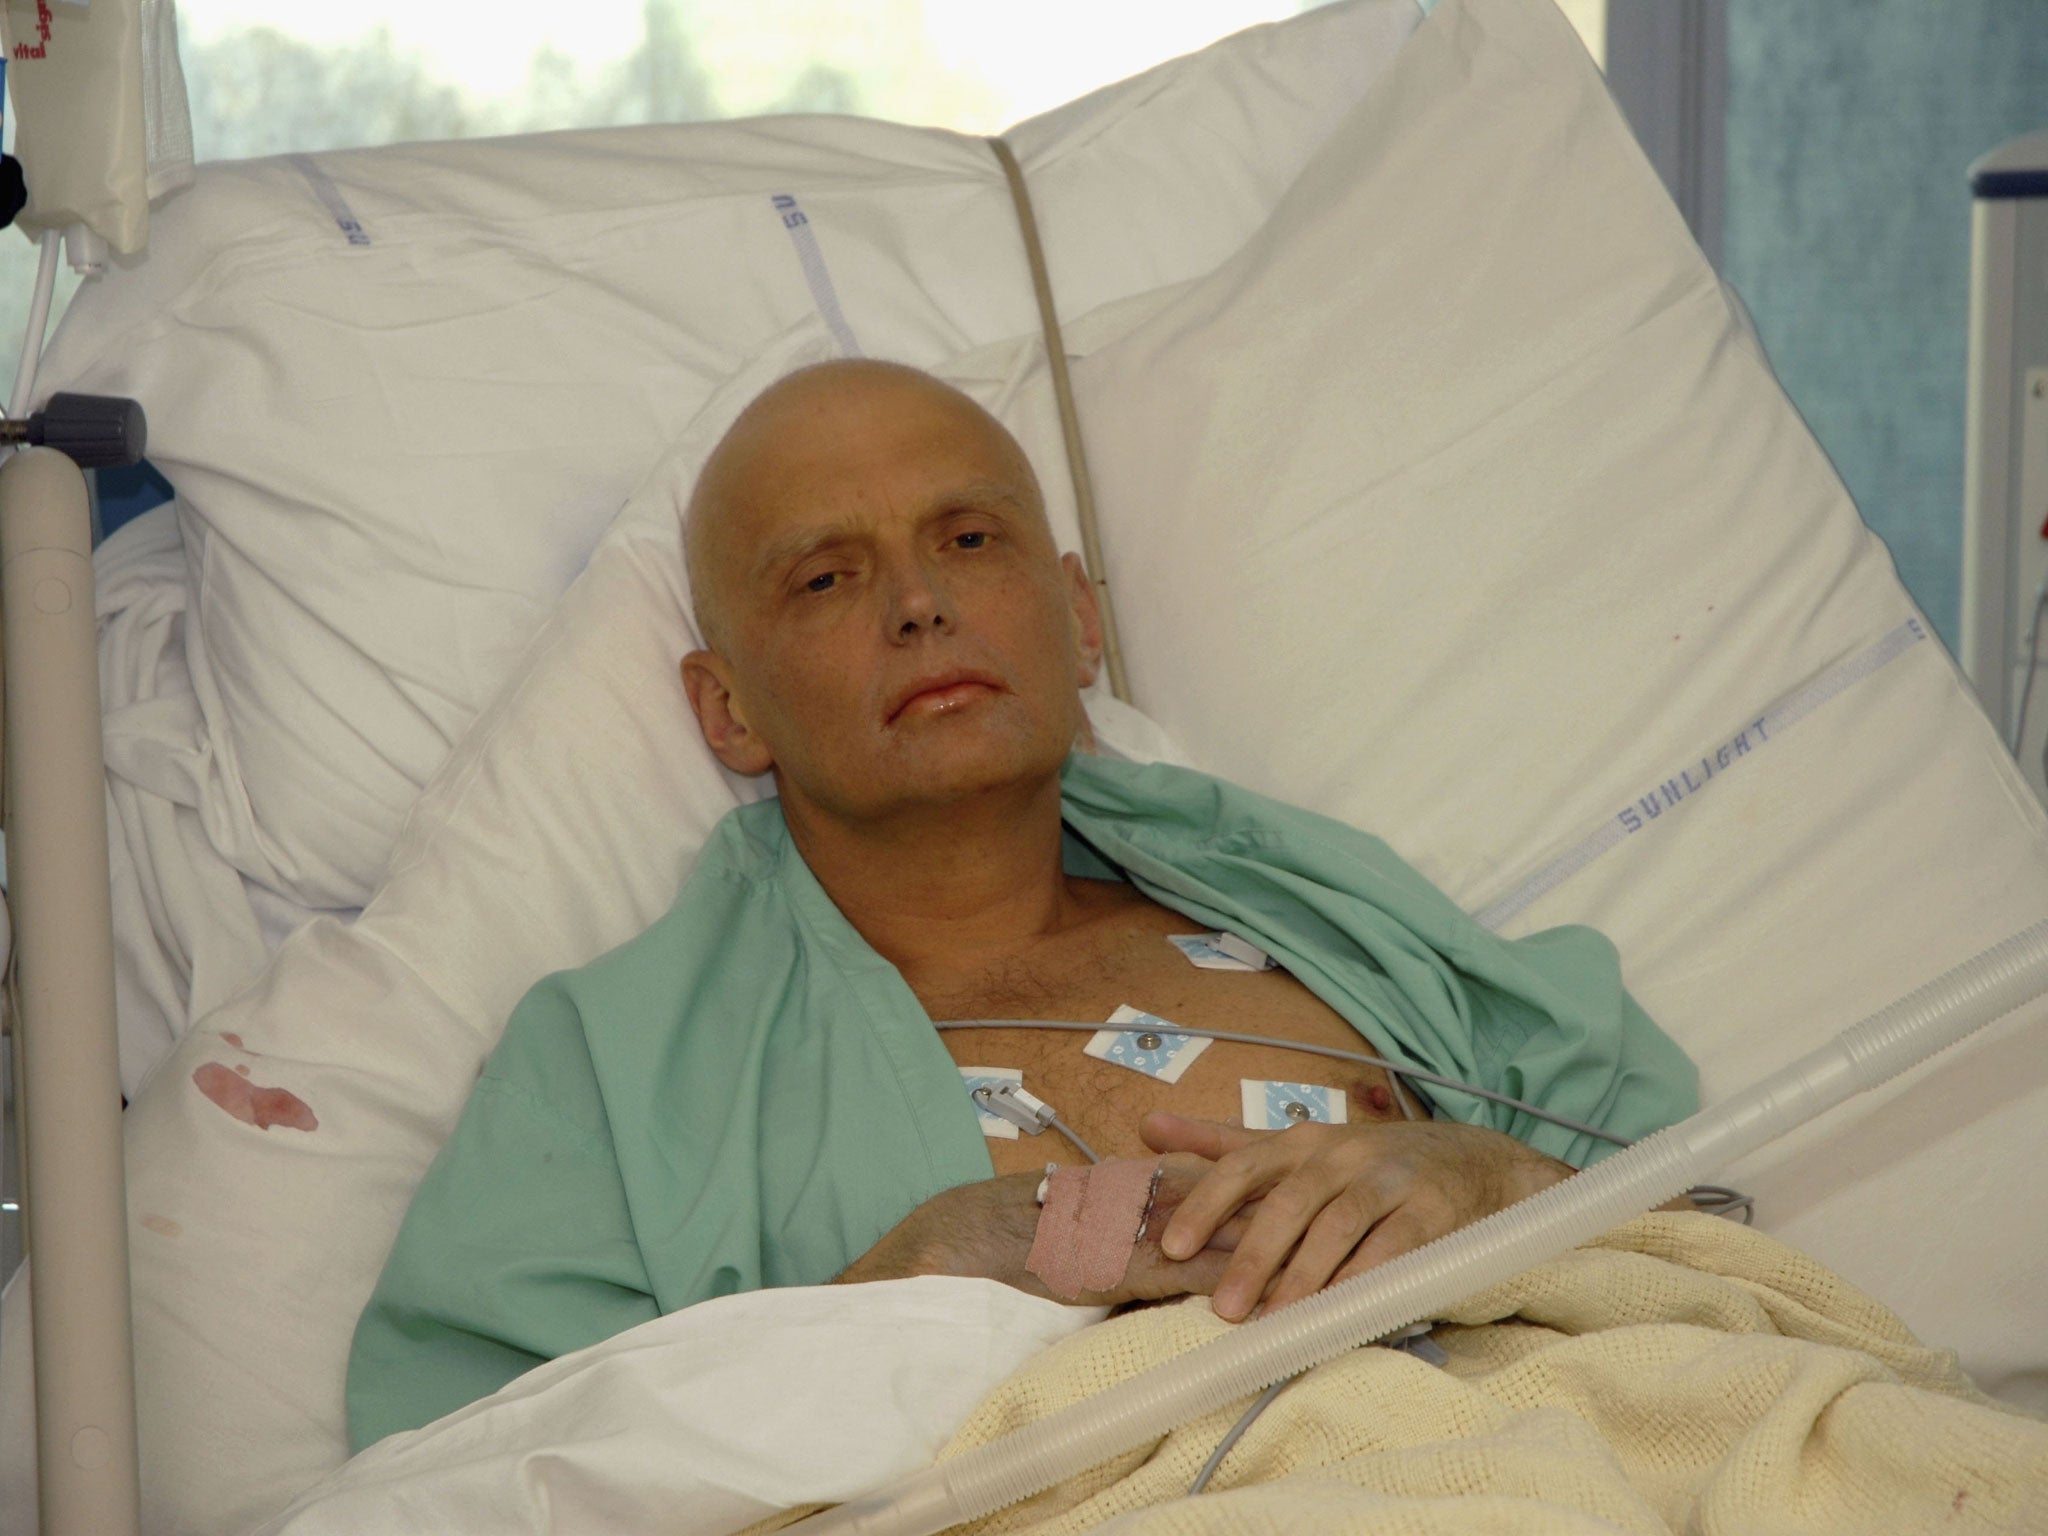 Alexander Litvinenko in 2006: he died a painful death from poisoning